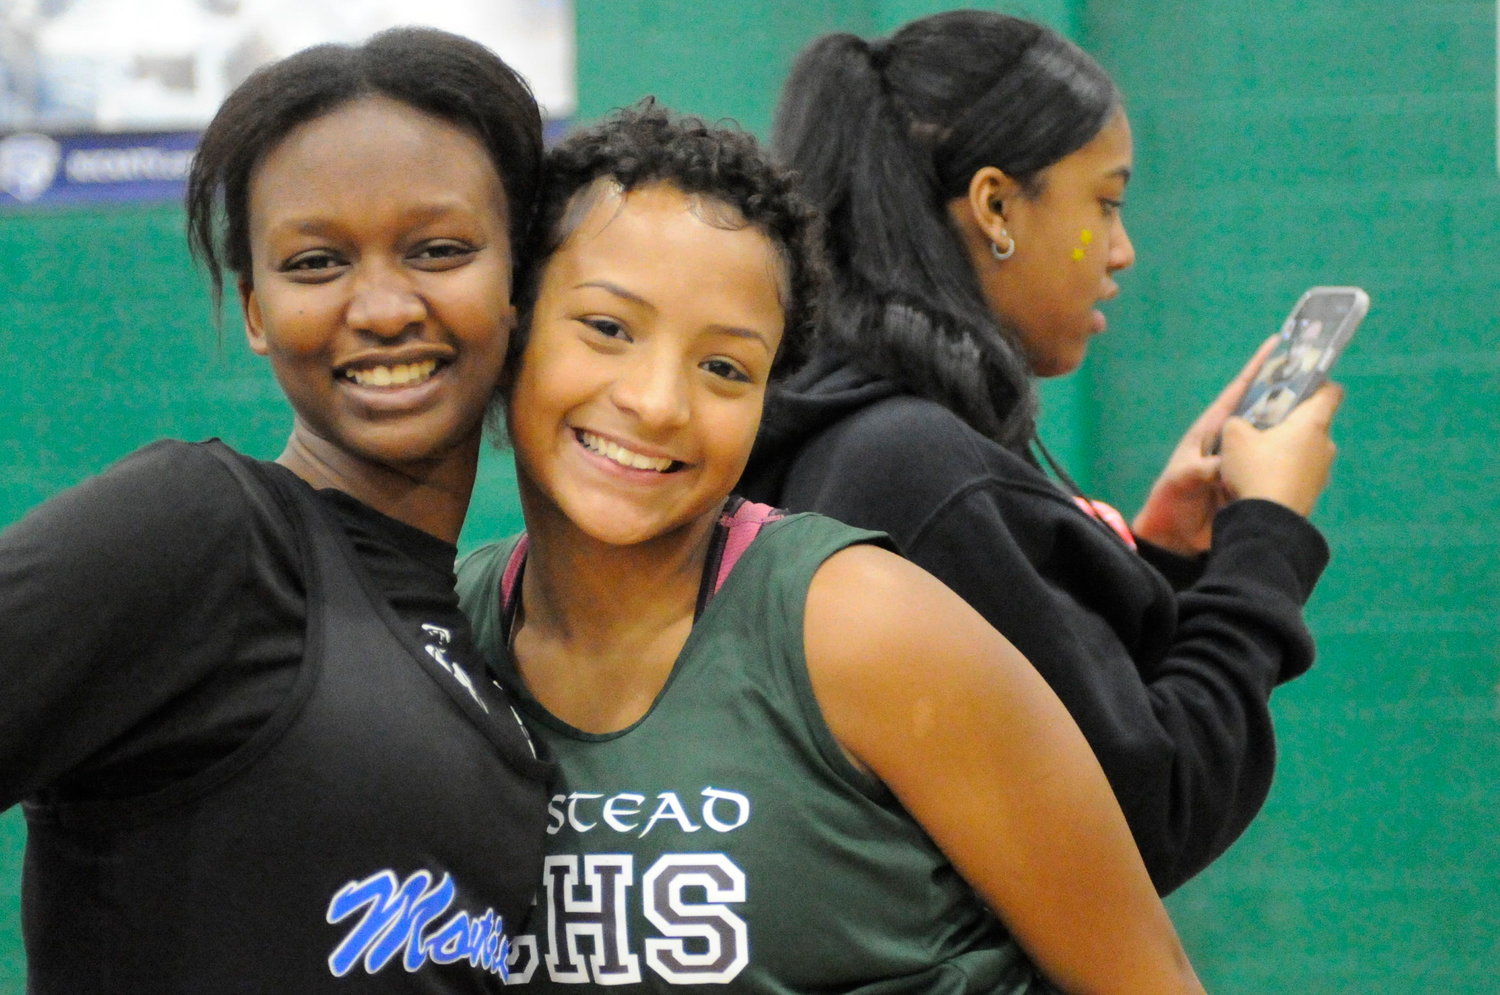 Taking a break. The Homestead School’s Ayana Banks, right, strikes a pose in between events with a runner from Monticello.